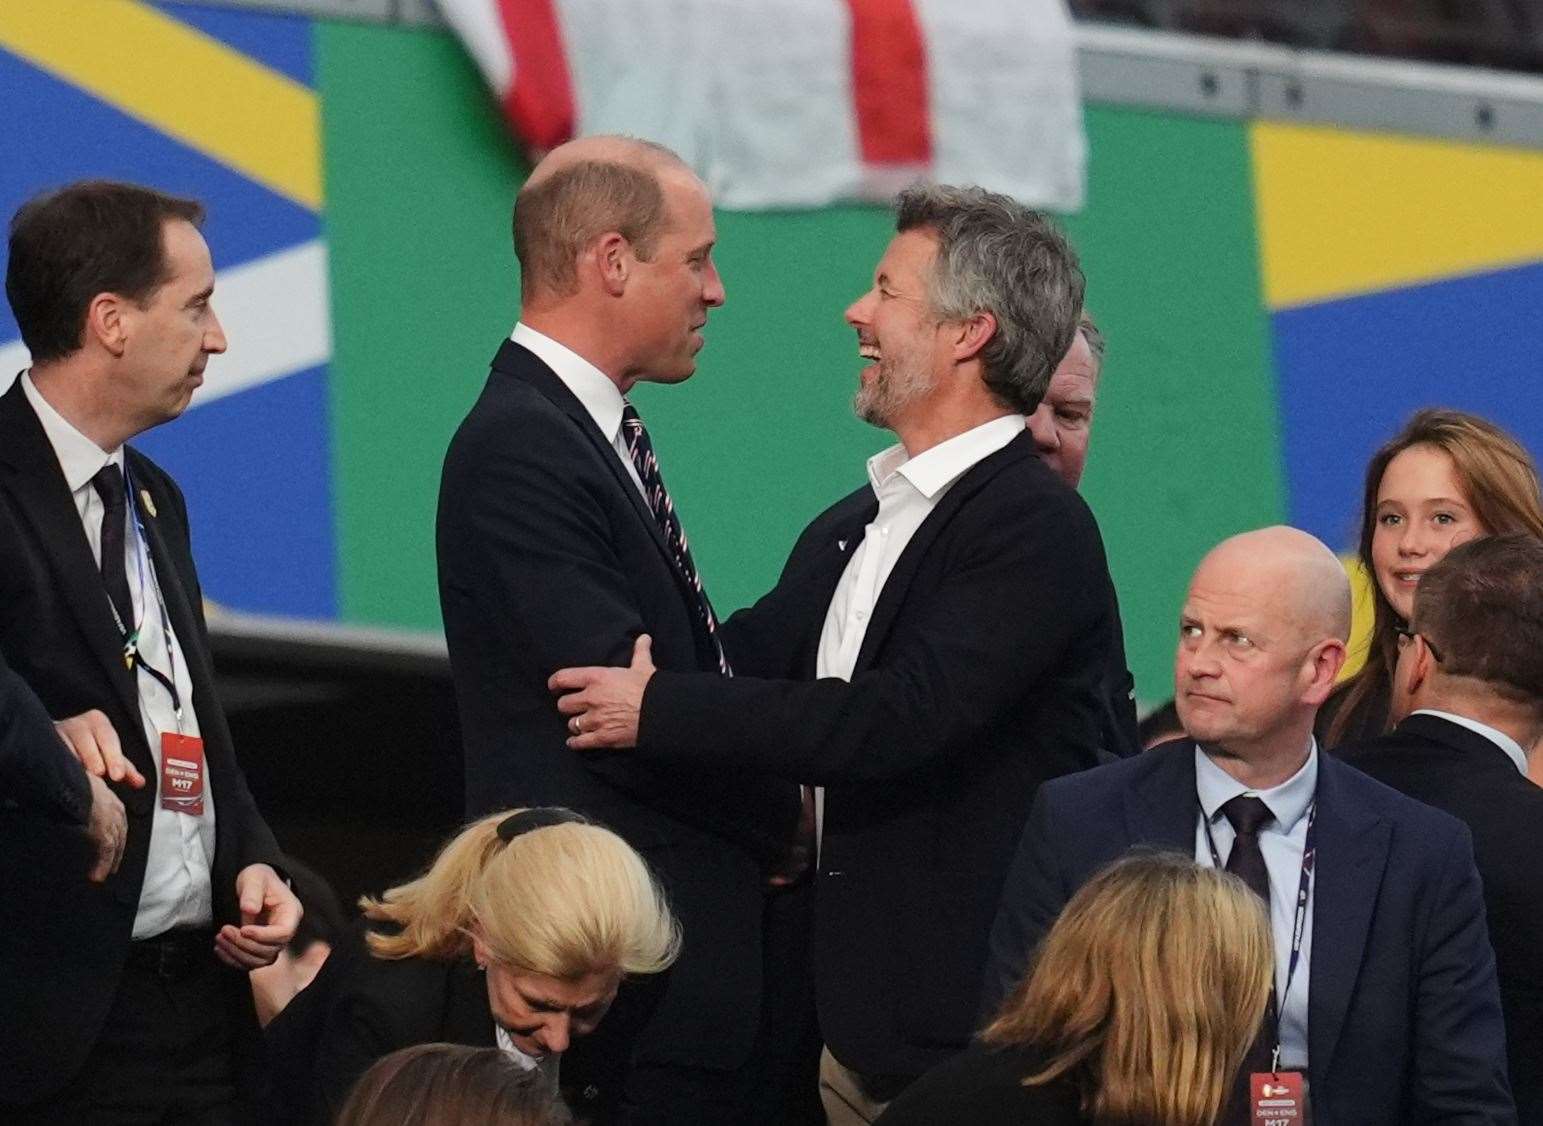 William and King Frederik X of Denmark in the stands after the match in Frankfurt (Adam Davy/PA)